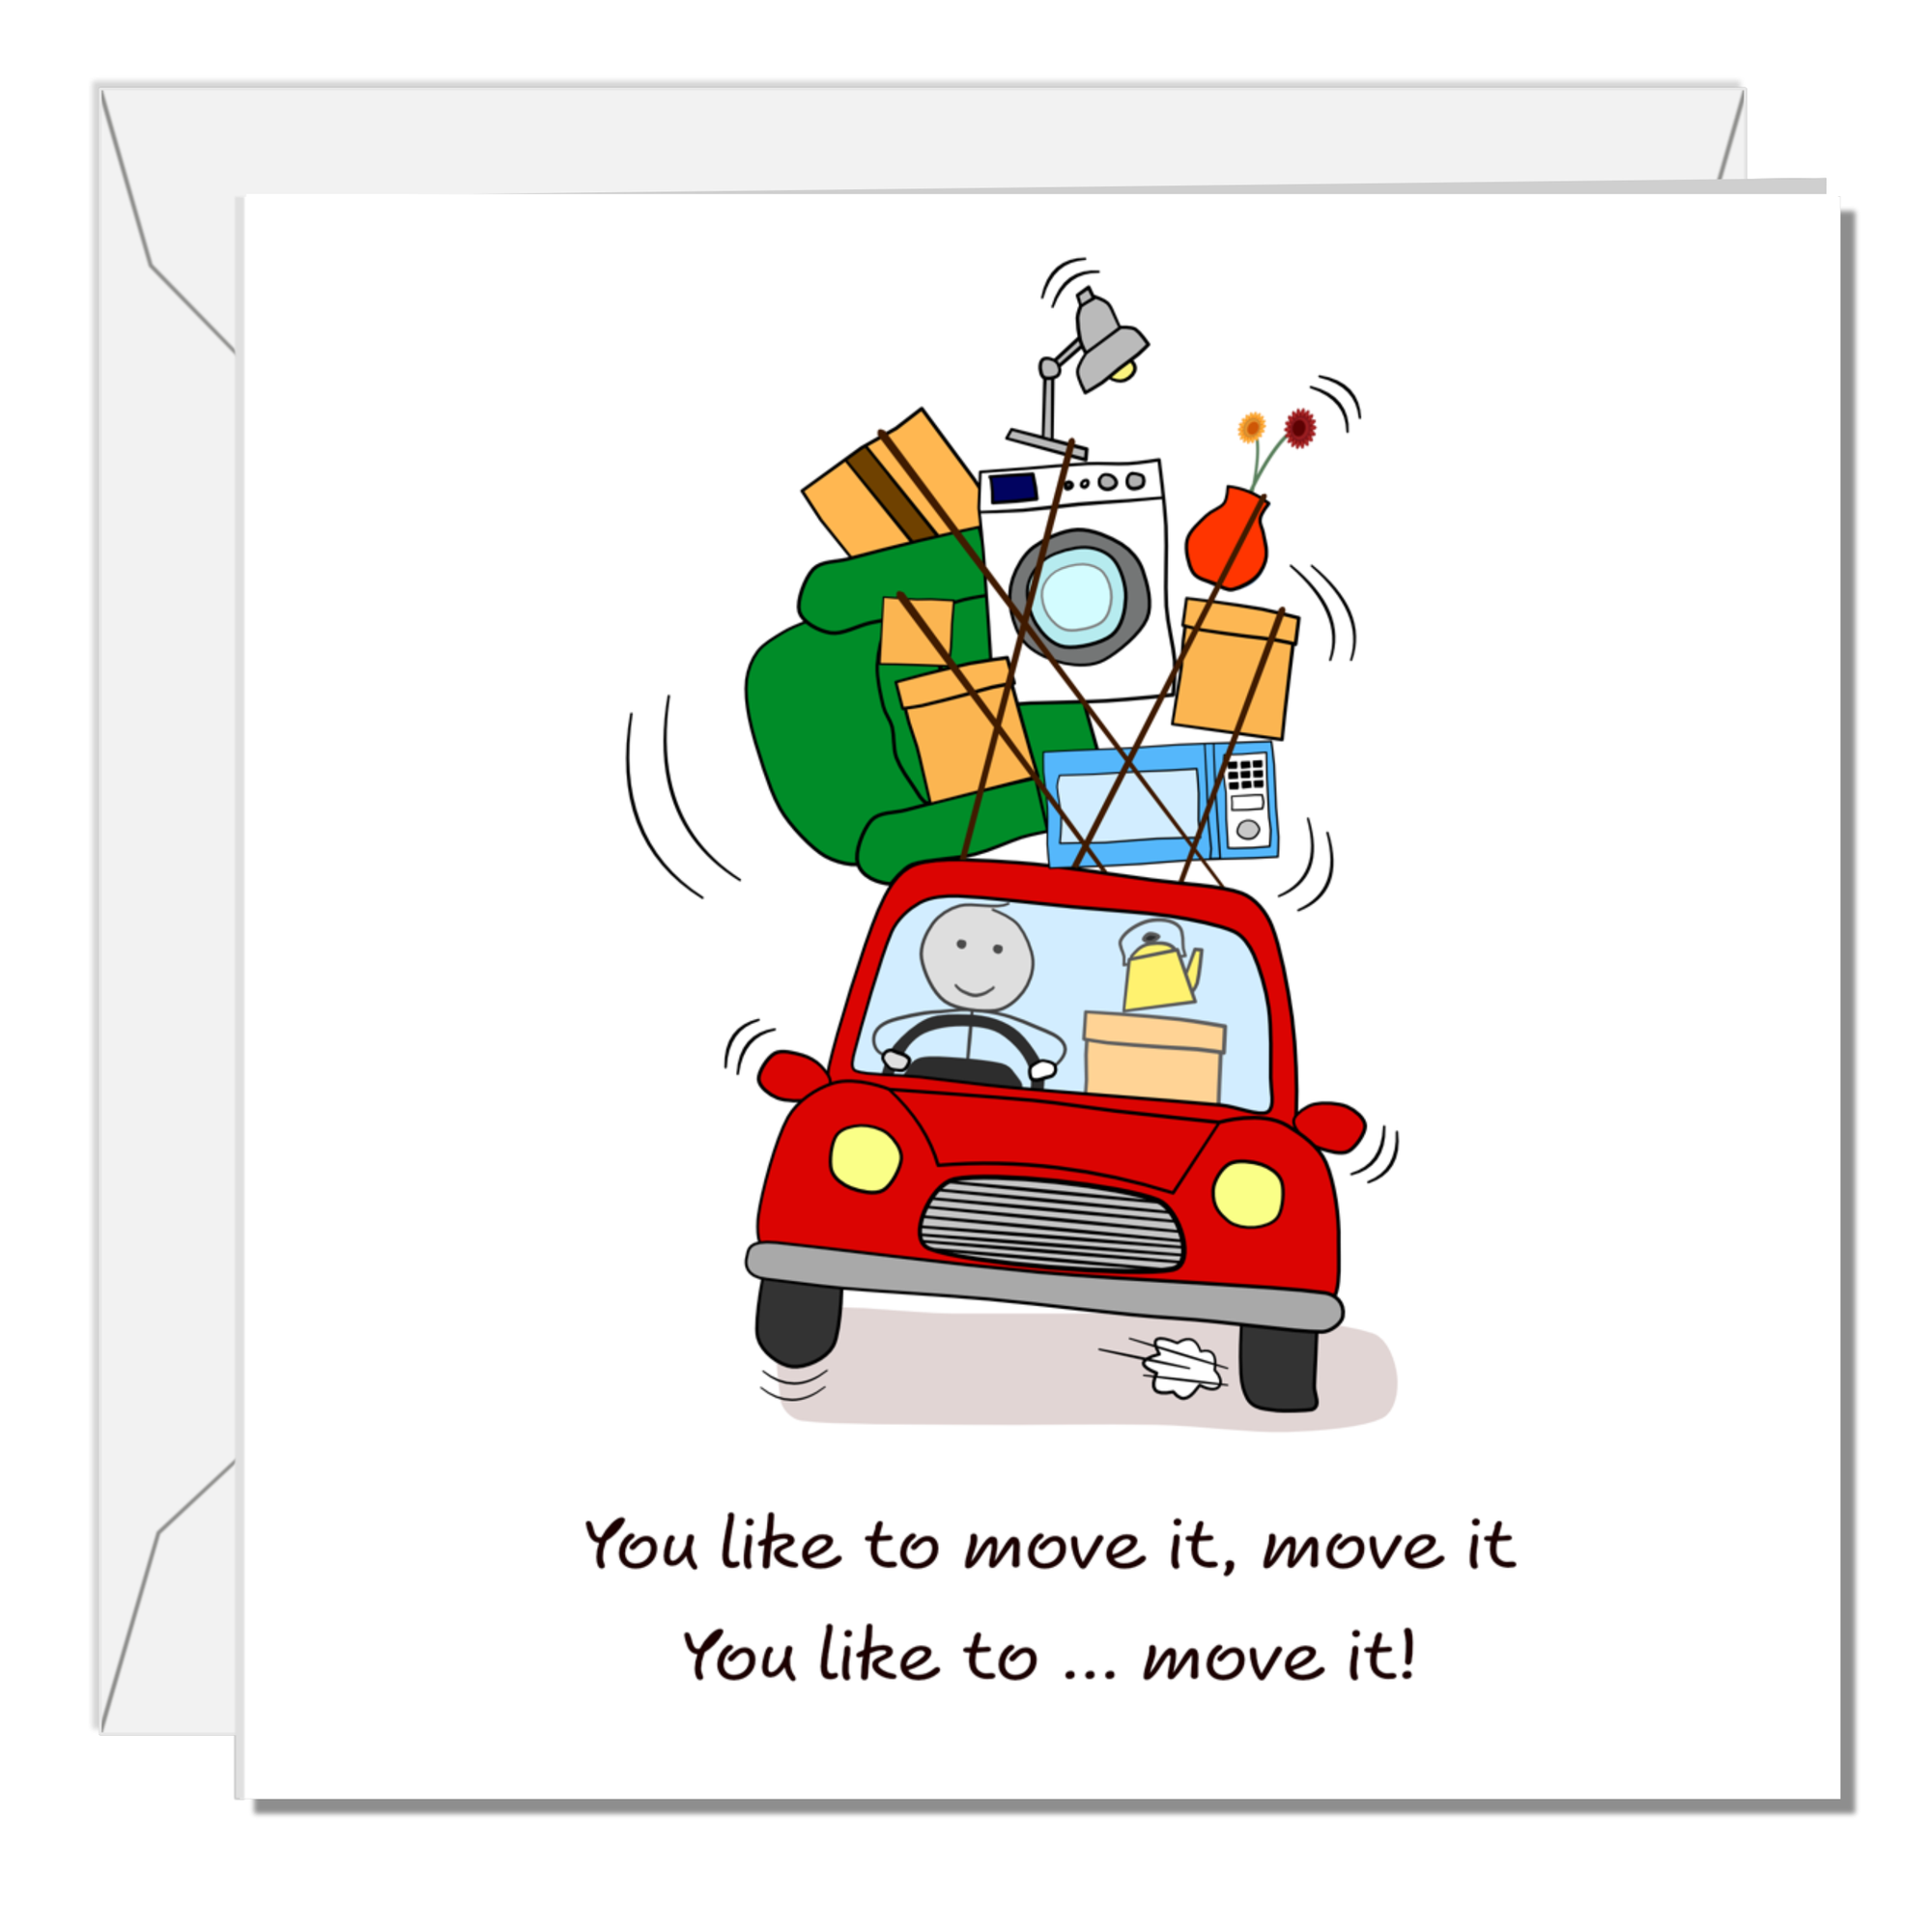 Funny New Home Card Congratulations Buy House Housewarming Friends Son Daughter Friend